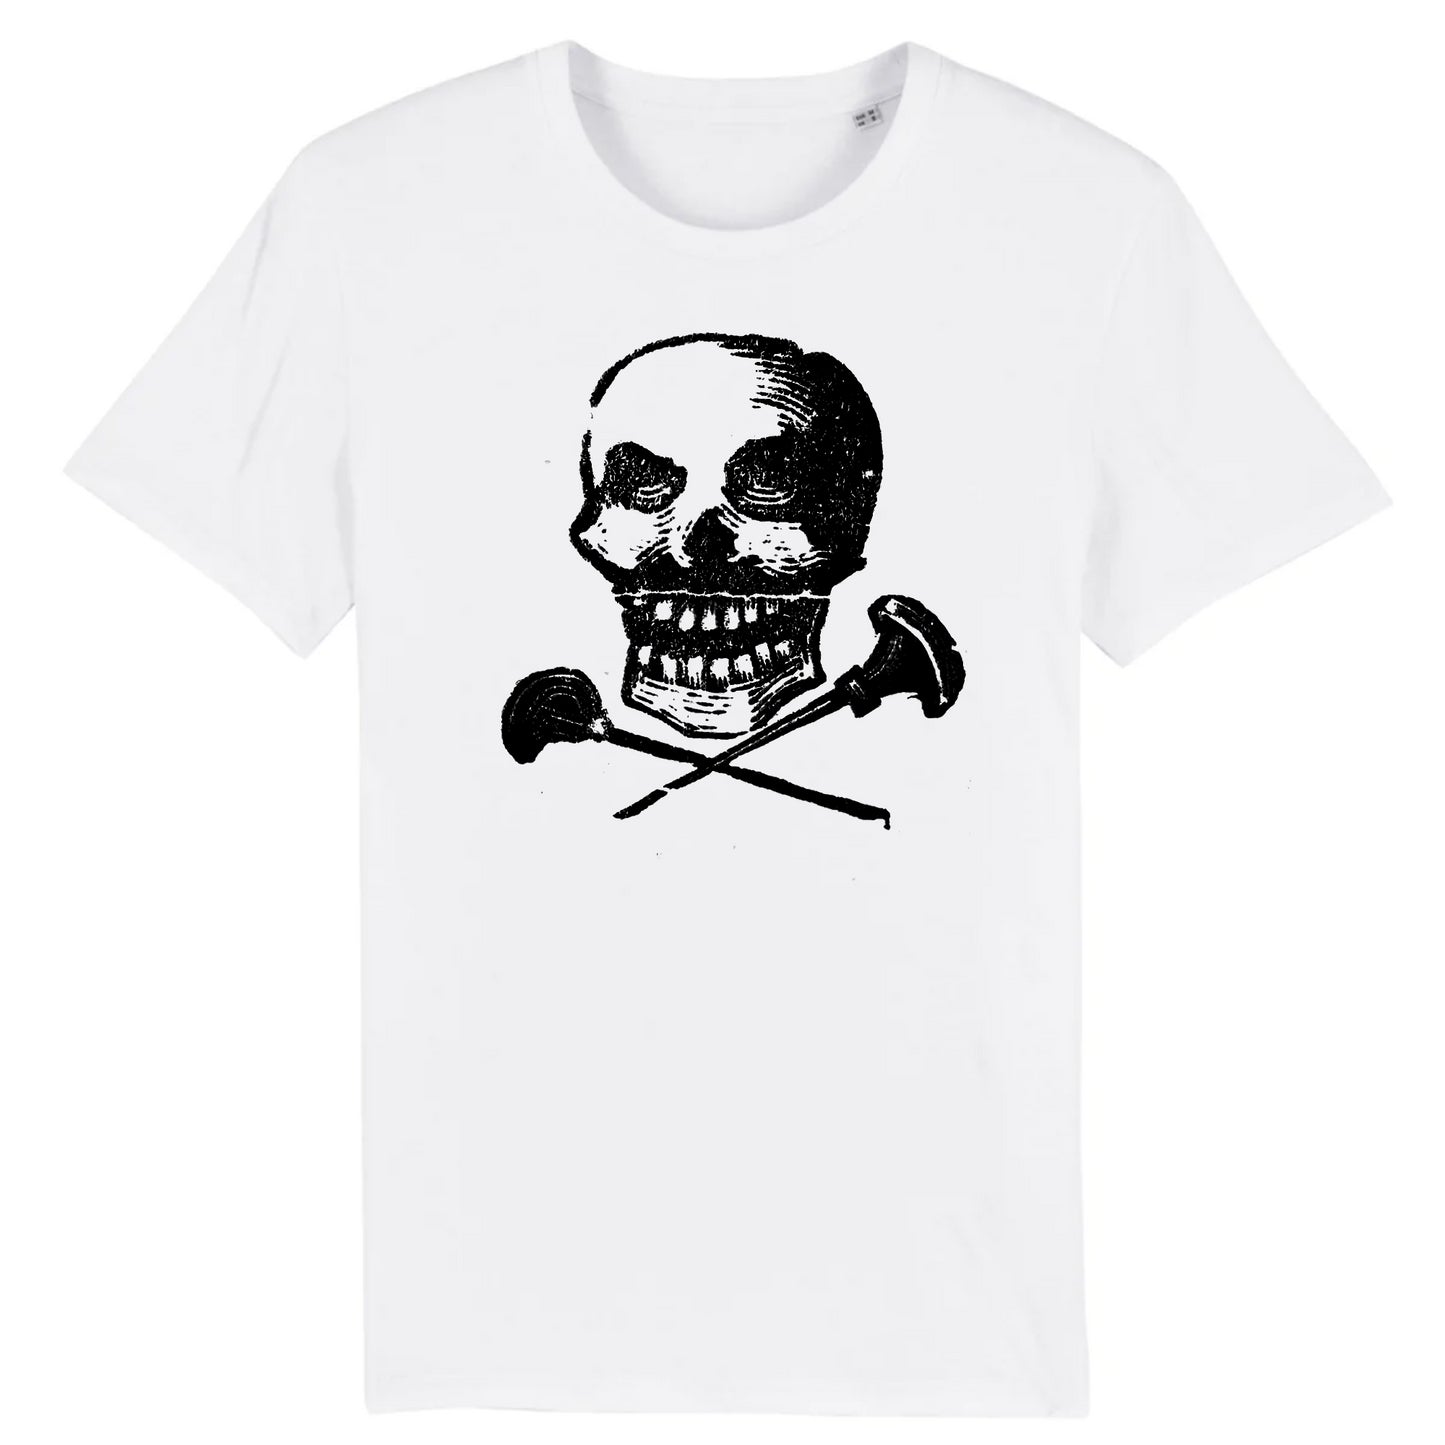 Calavera of the Engraver by Jose Guadalupe Posada - published 1947 - Organic Cotton T-Shirt